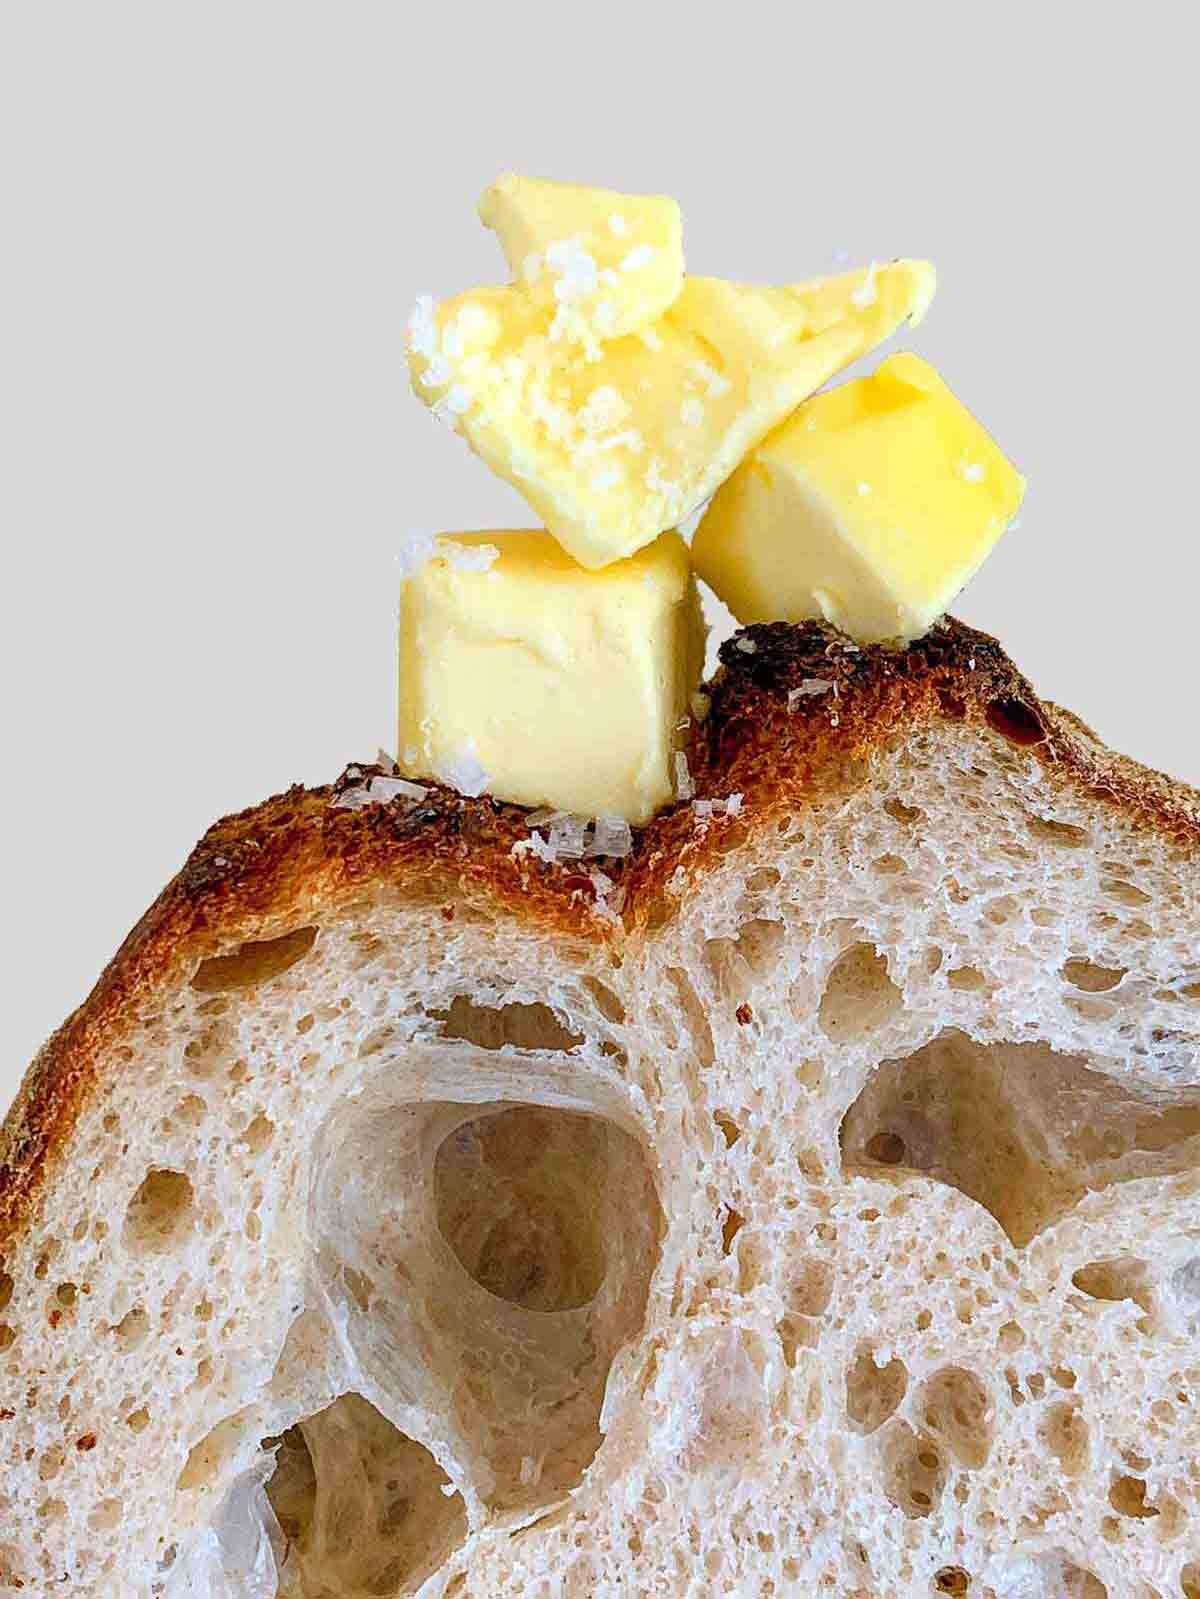 A view of the inside of a loaf of no-knead bread with cubes of butter and a sprinkle of salt on top.